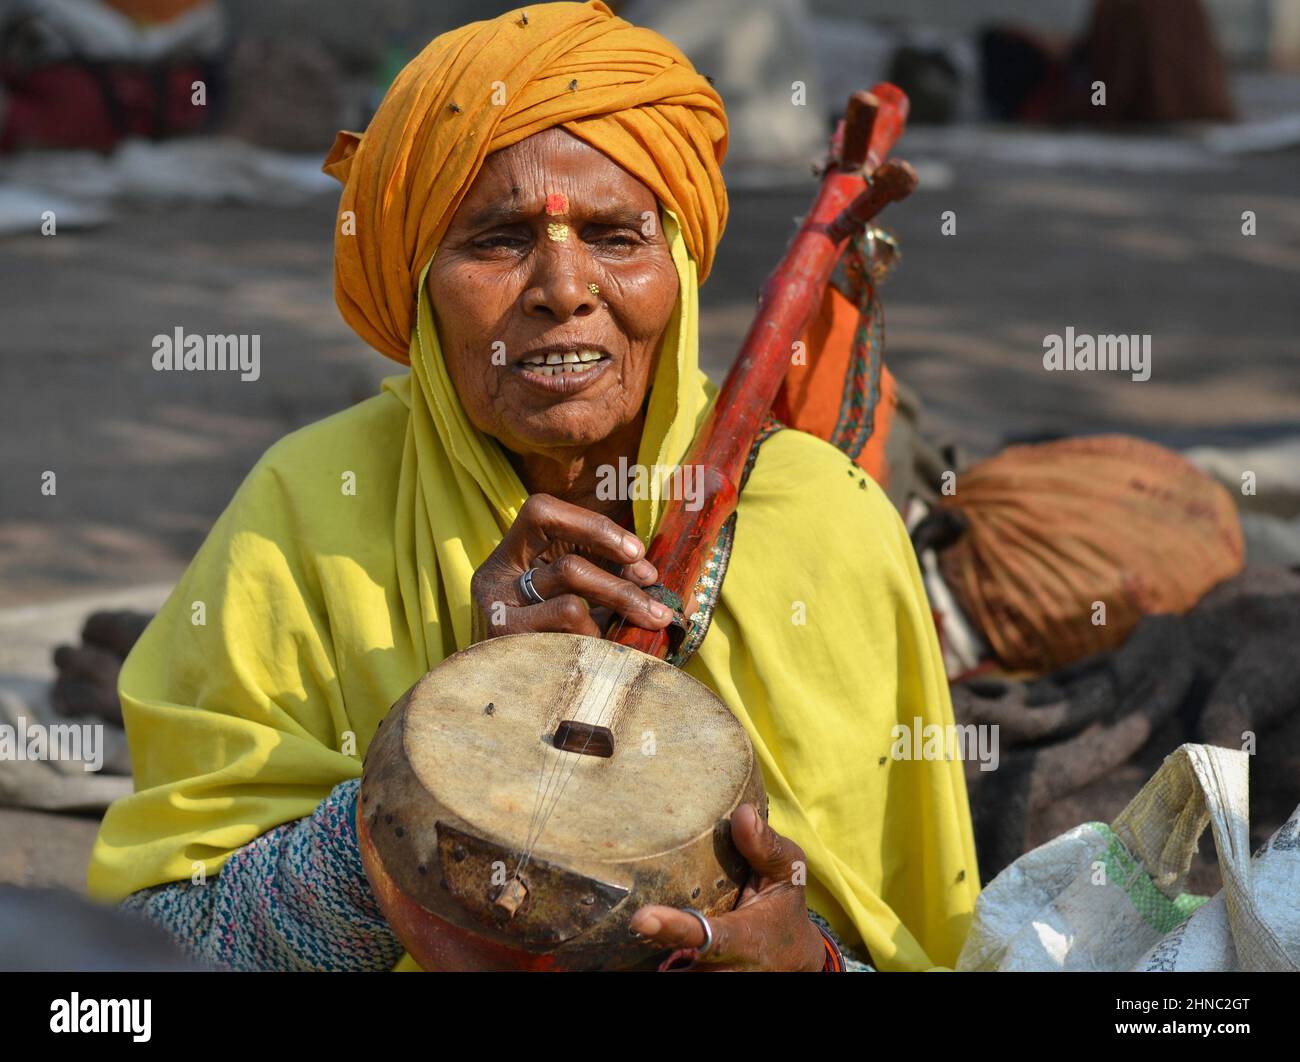 Old Indian temple musician with traditional dotar (plucked Indian string instrument) plays his instrument and sings at the Hindu Ram Raja Mandir. Stock Photo